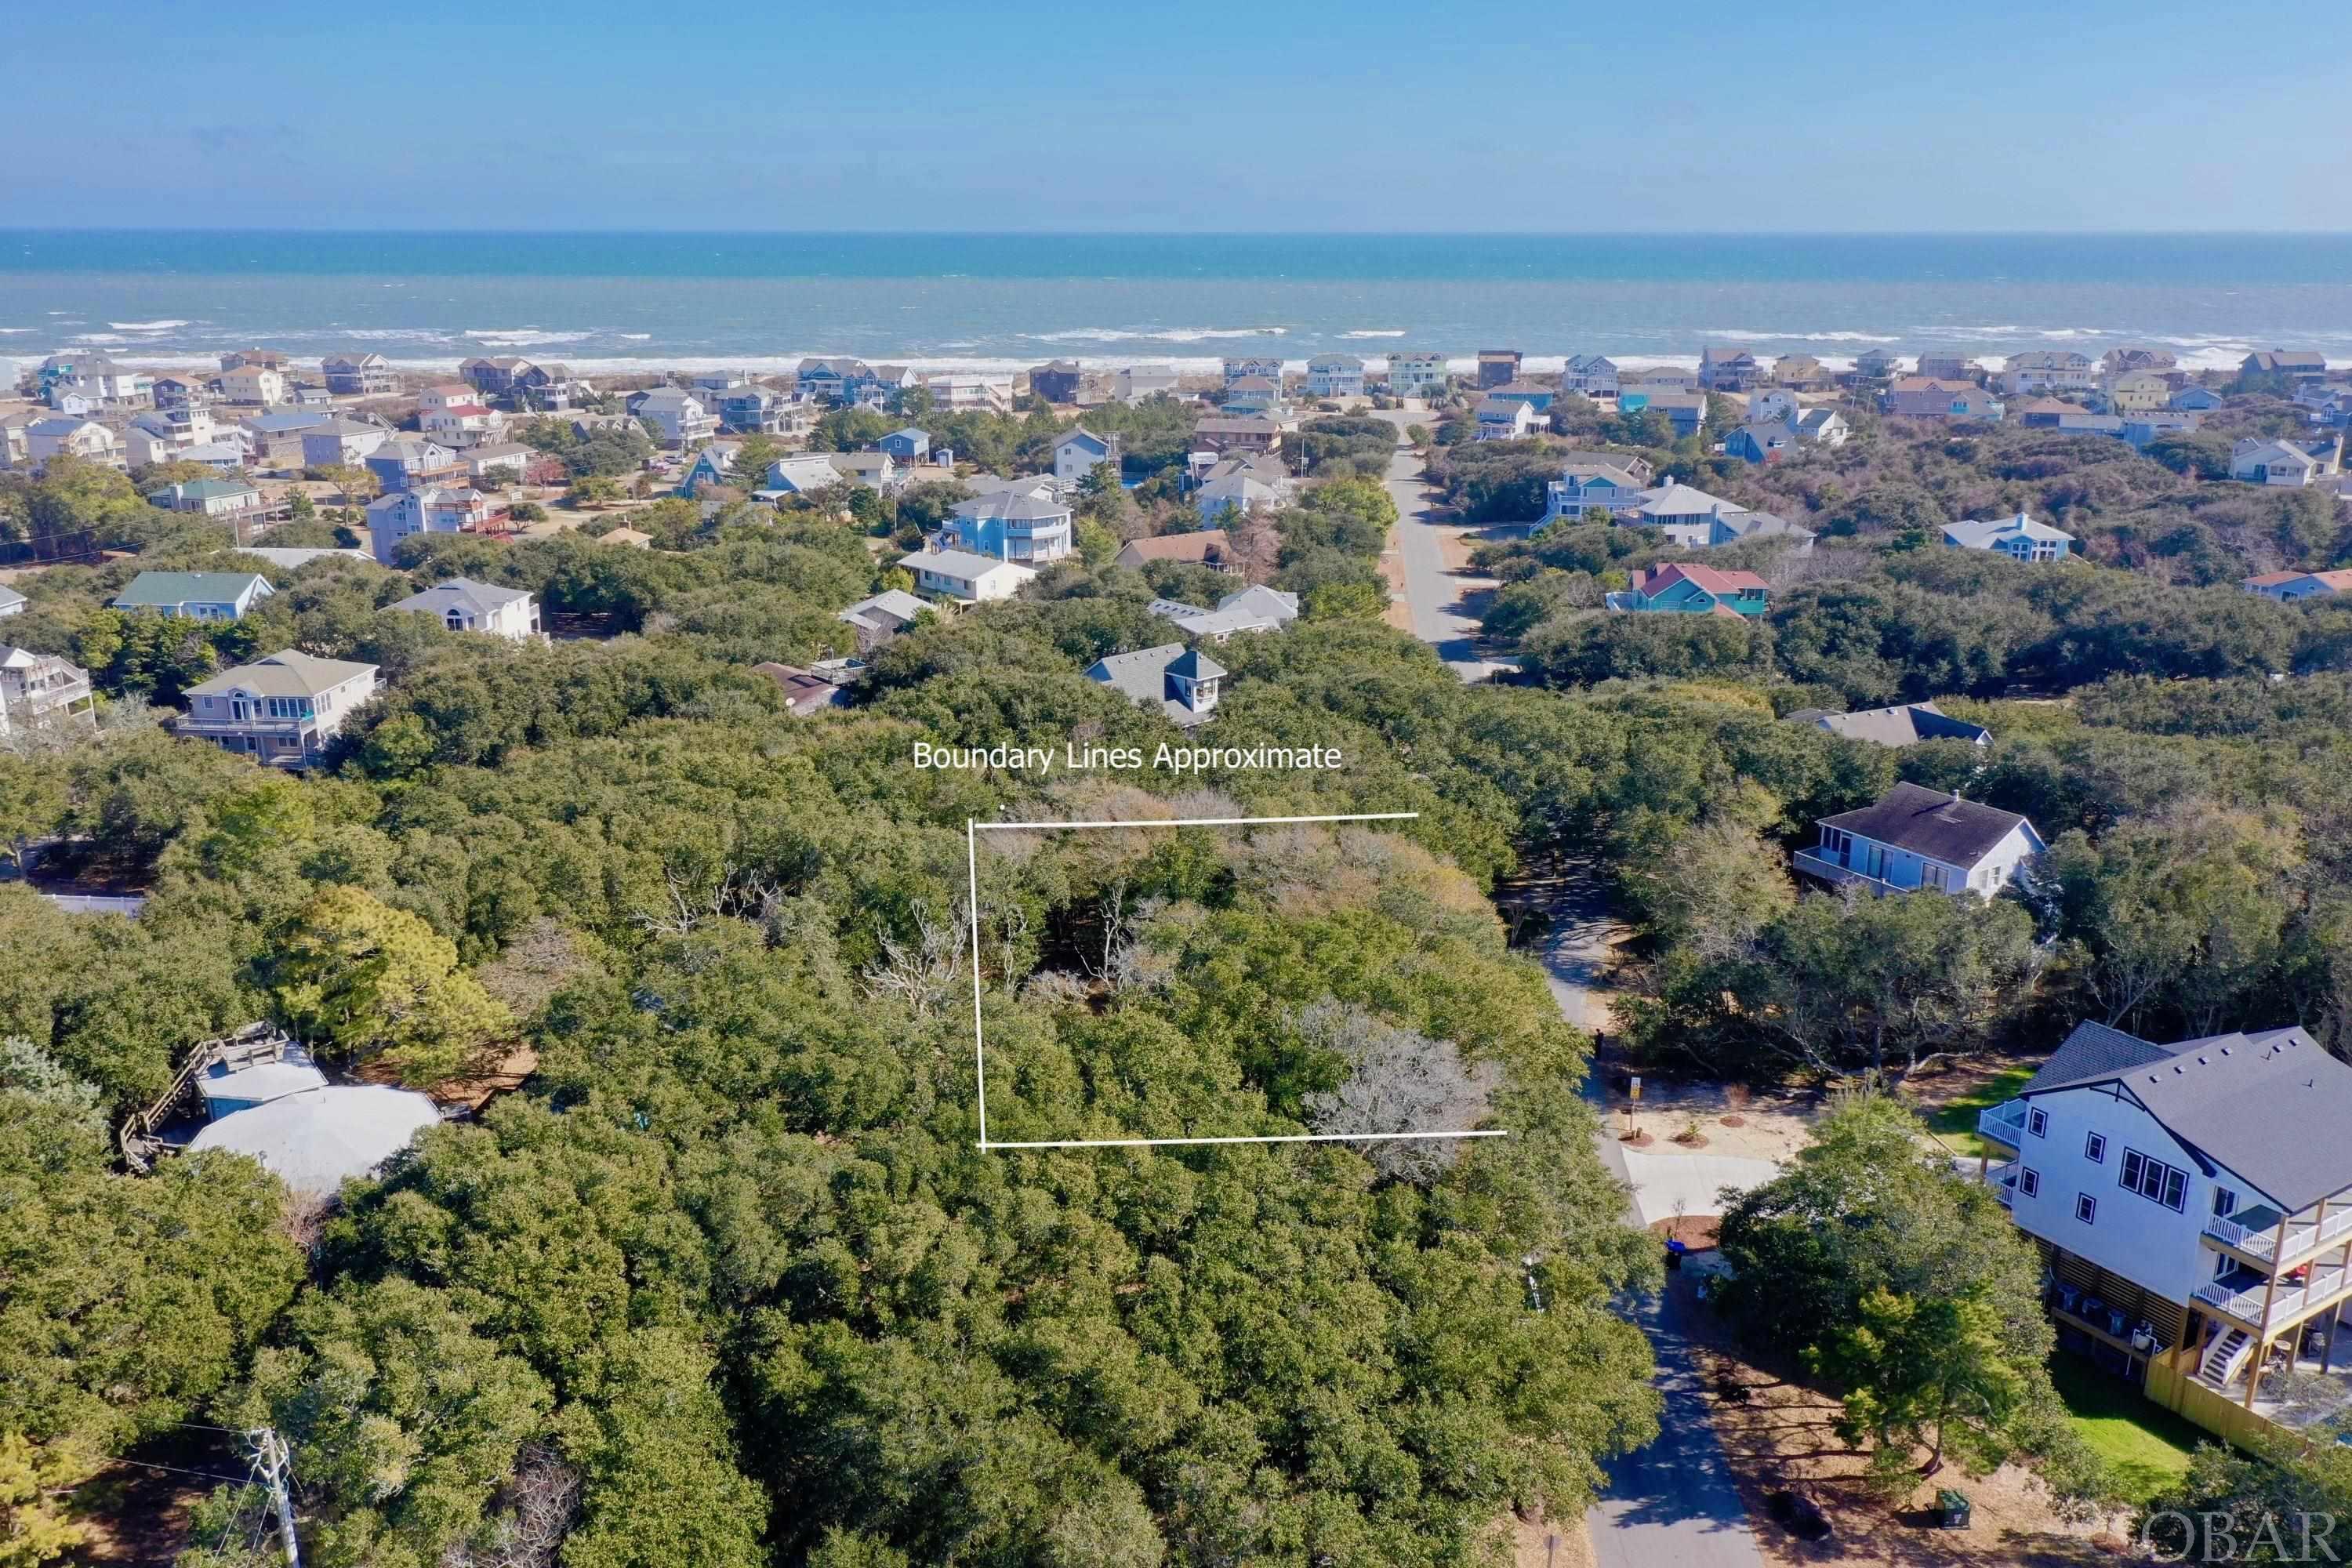 15,000 sq. ft. homesite sits in an X flood zone (no flood insurance required) with majestic live oaks in the private Caffey's Inlet Hamlet. Caffey's Inlet was the first neighborhood in Duck to create a Soundfront park for the entire neighborhood to enjoy water sports and breathtaking sunsets. This desirable ocean side location is the perfect place to build your dream home. There's a small community charm with a mix of second homes, primary homes, and some rentals. If you want to be on the quieter side of Duck, this is for you. The community ocean access is just a short walk away with it's less crowded beaches and plenty of elbow room to spread out. Caffey's Inlet Beach has one of the few Lifeguard stands in the town of Duck. The Village of Duck is just a short bike ride away (1 mile) where you can enjoy boutiques, award winning restaurants, coffee shops, yoga, soundfront  boardwalk and the town park. Duck is the most sought after of Oceanside Areas on the Outer Banks offering a sidewalk through the entire town– great for biking, walking, running.